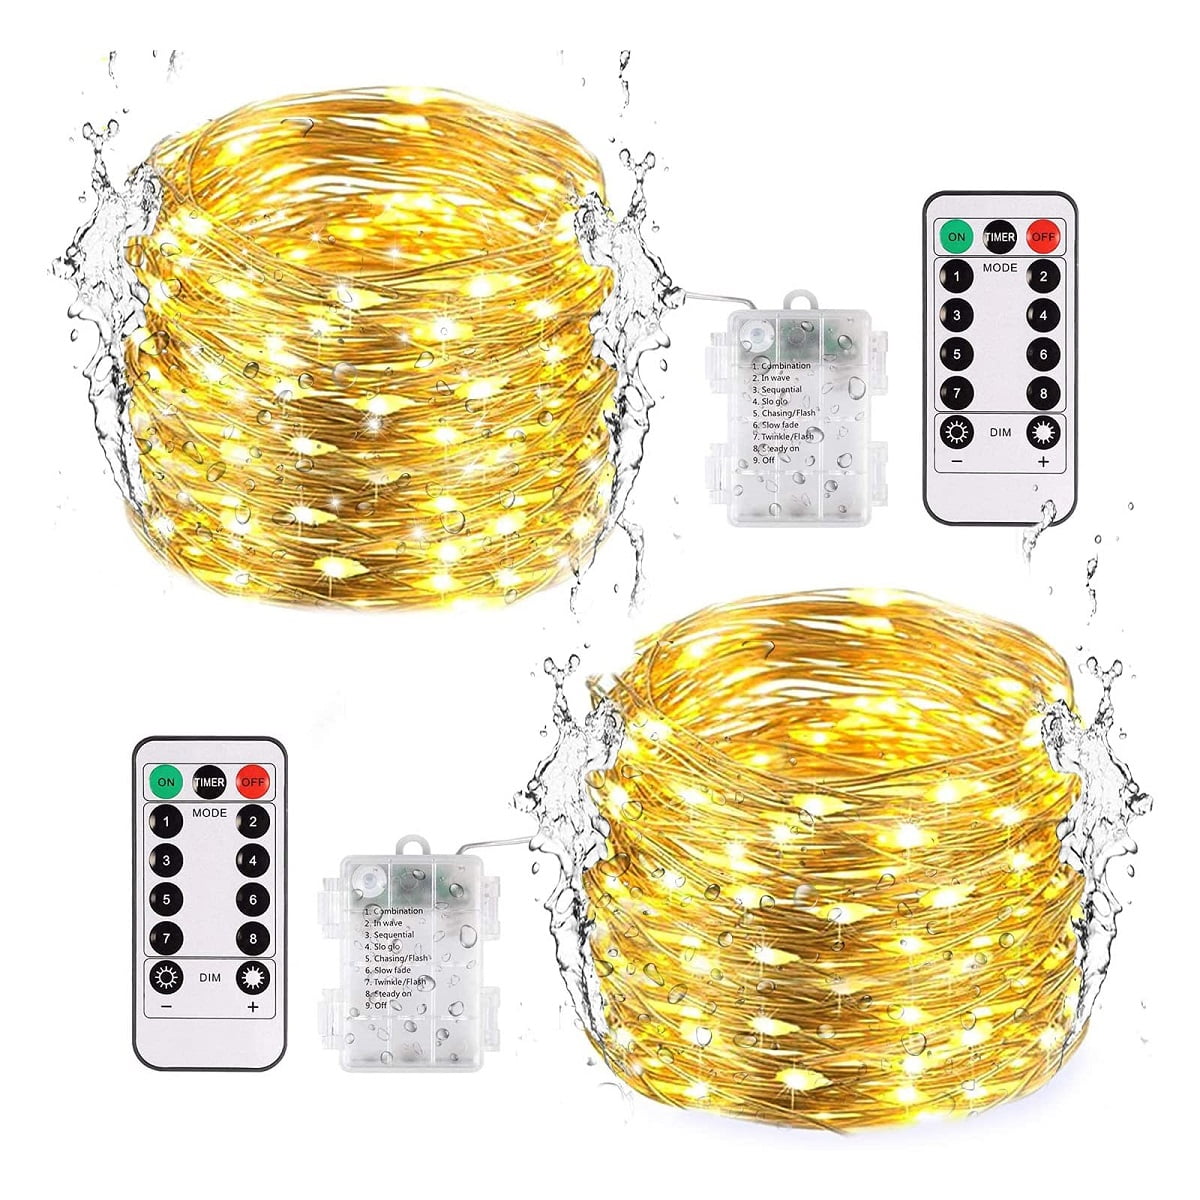 50/100LEDs USB Twinkle LED String Fairy Lights Copper Wire 8 Mode W/ Remote 